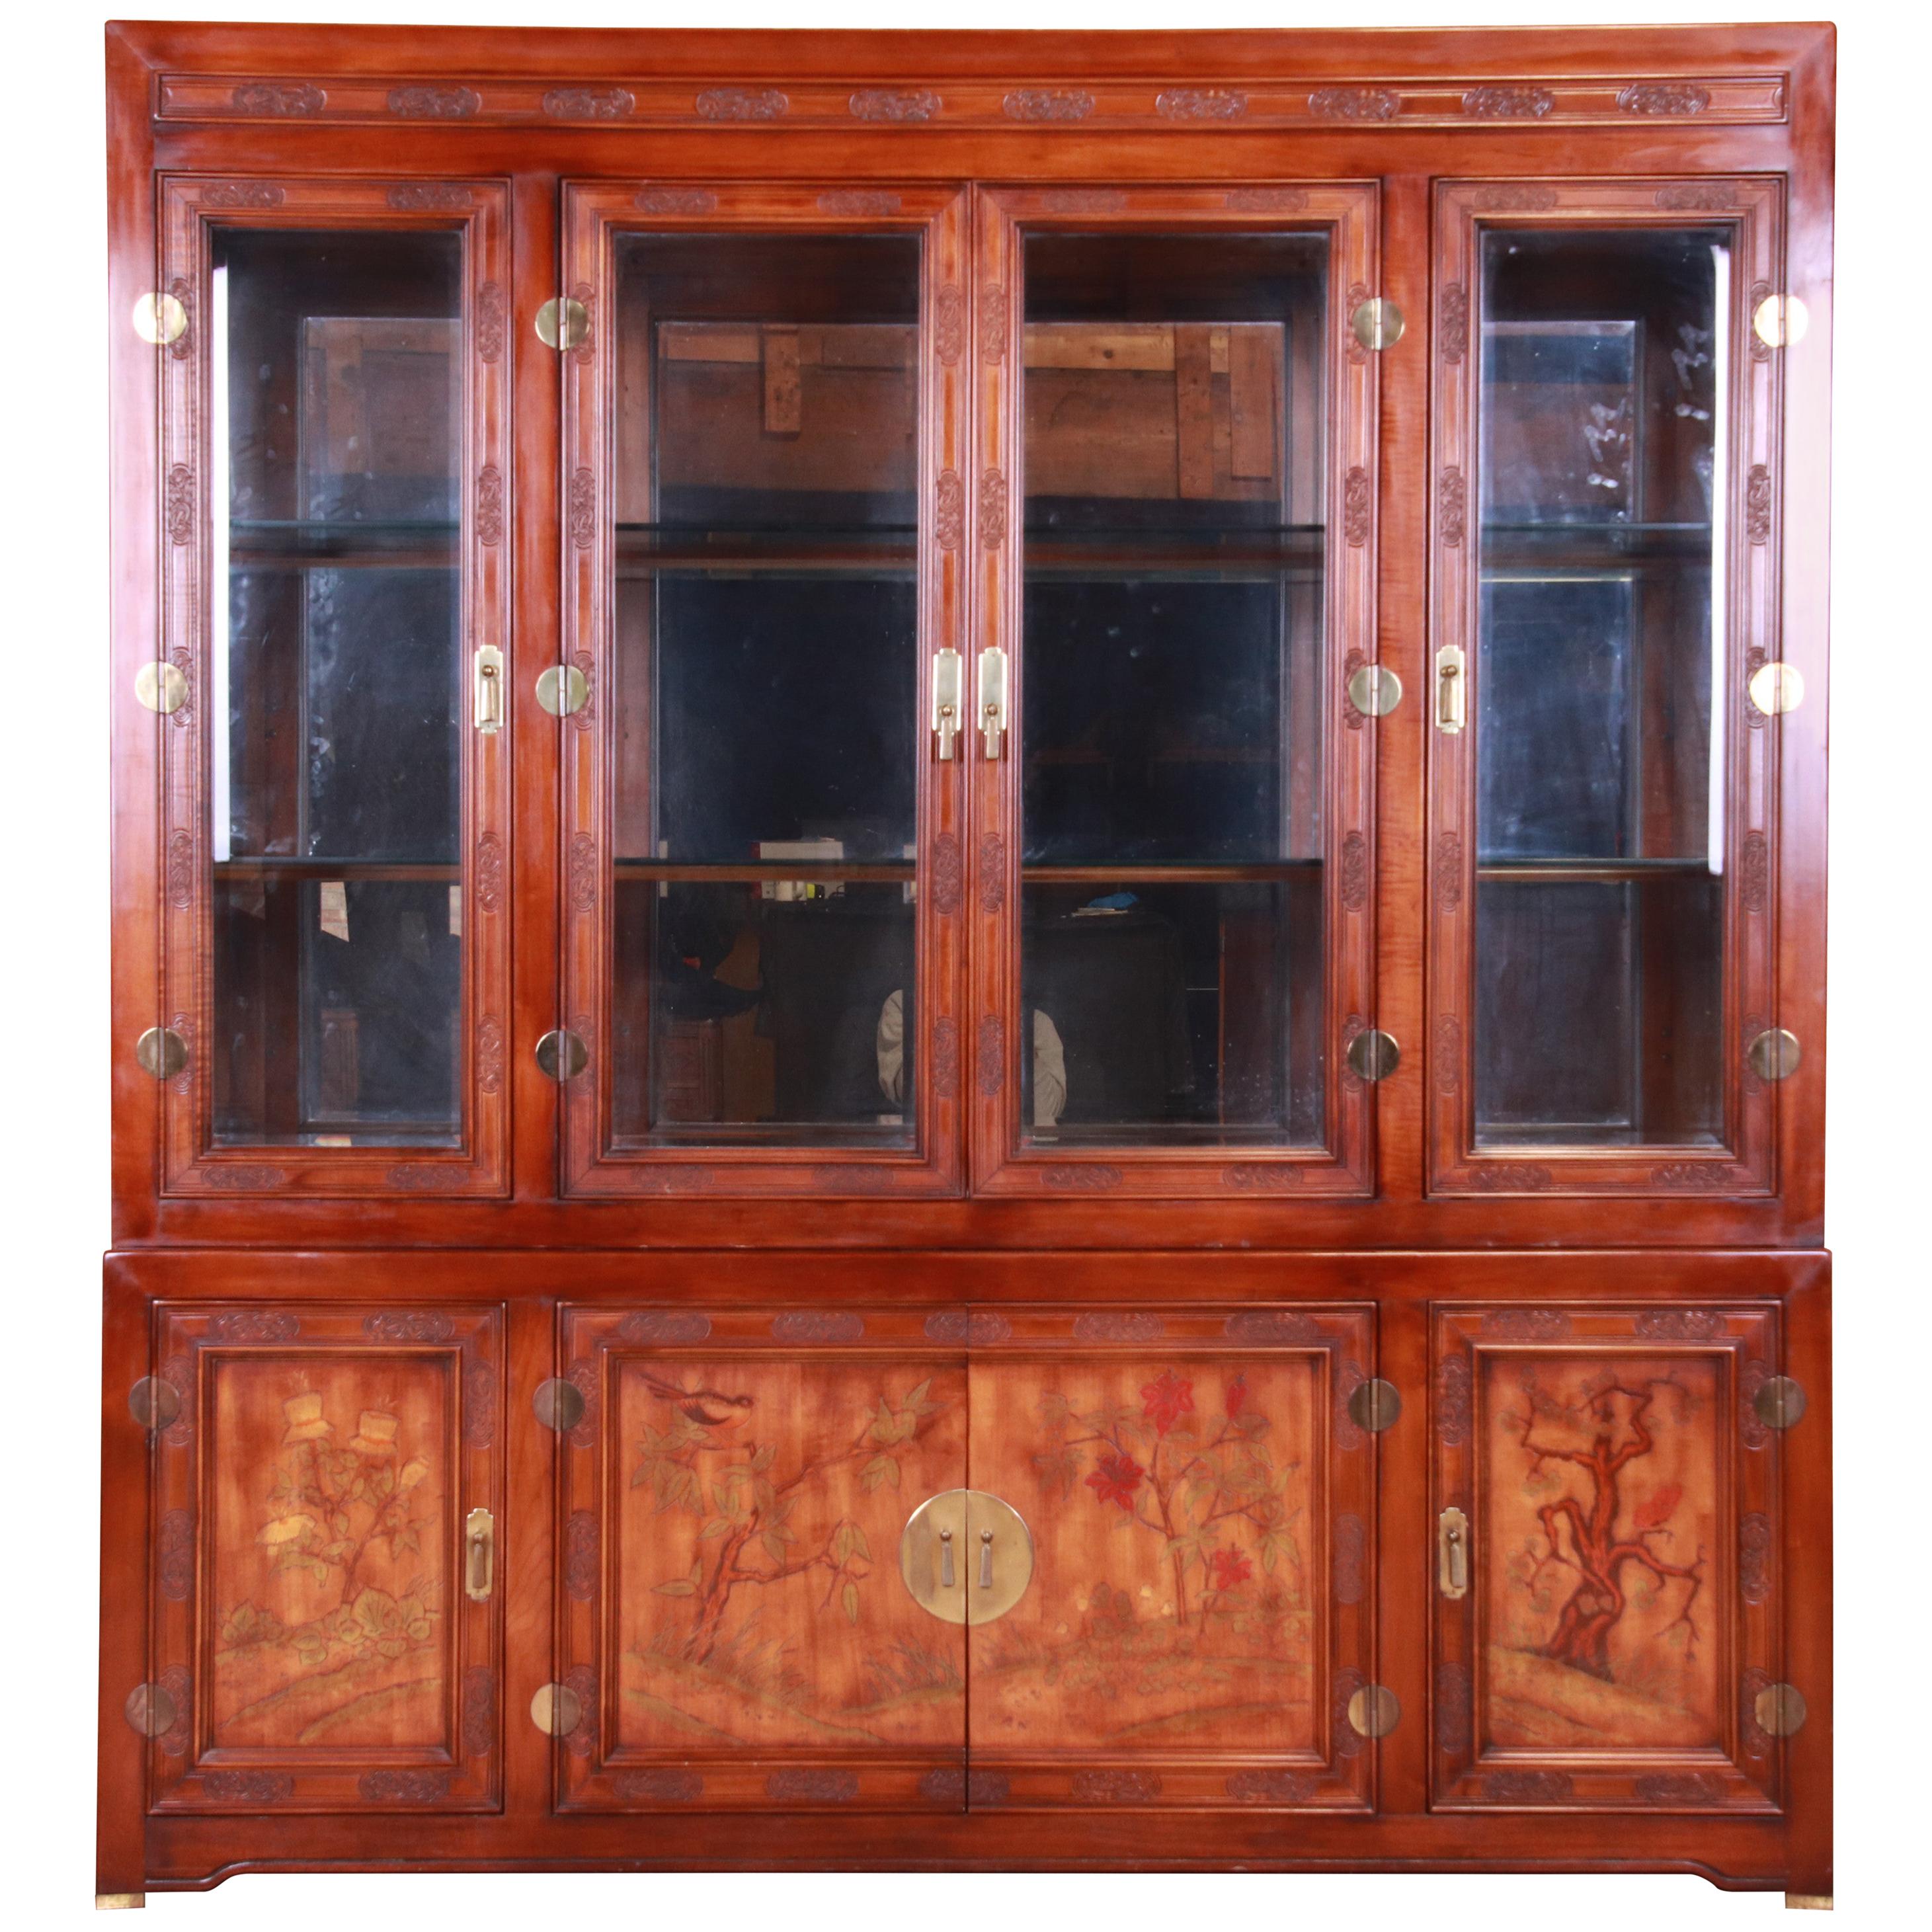 Bernhardt Hollywood Regency Chinoiserie Breakfront Bookcase or Bar Cabinet